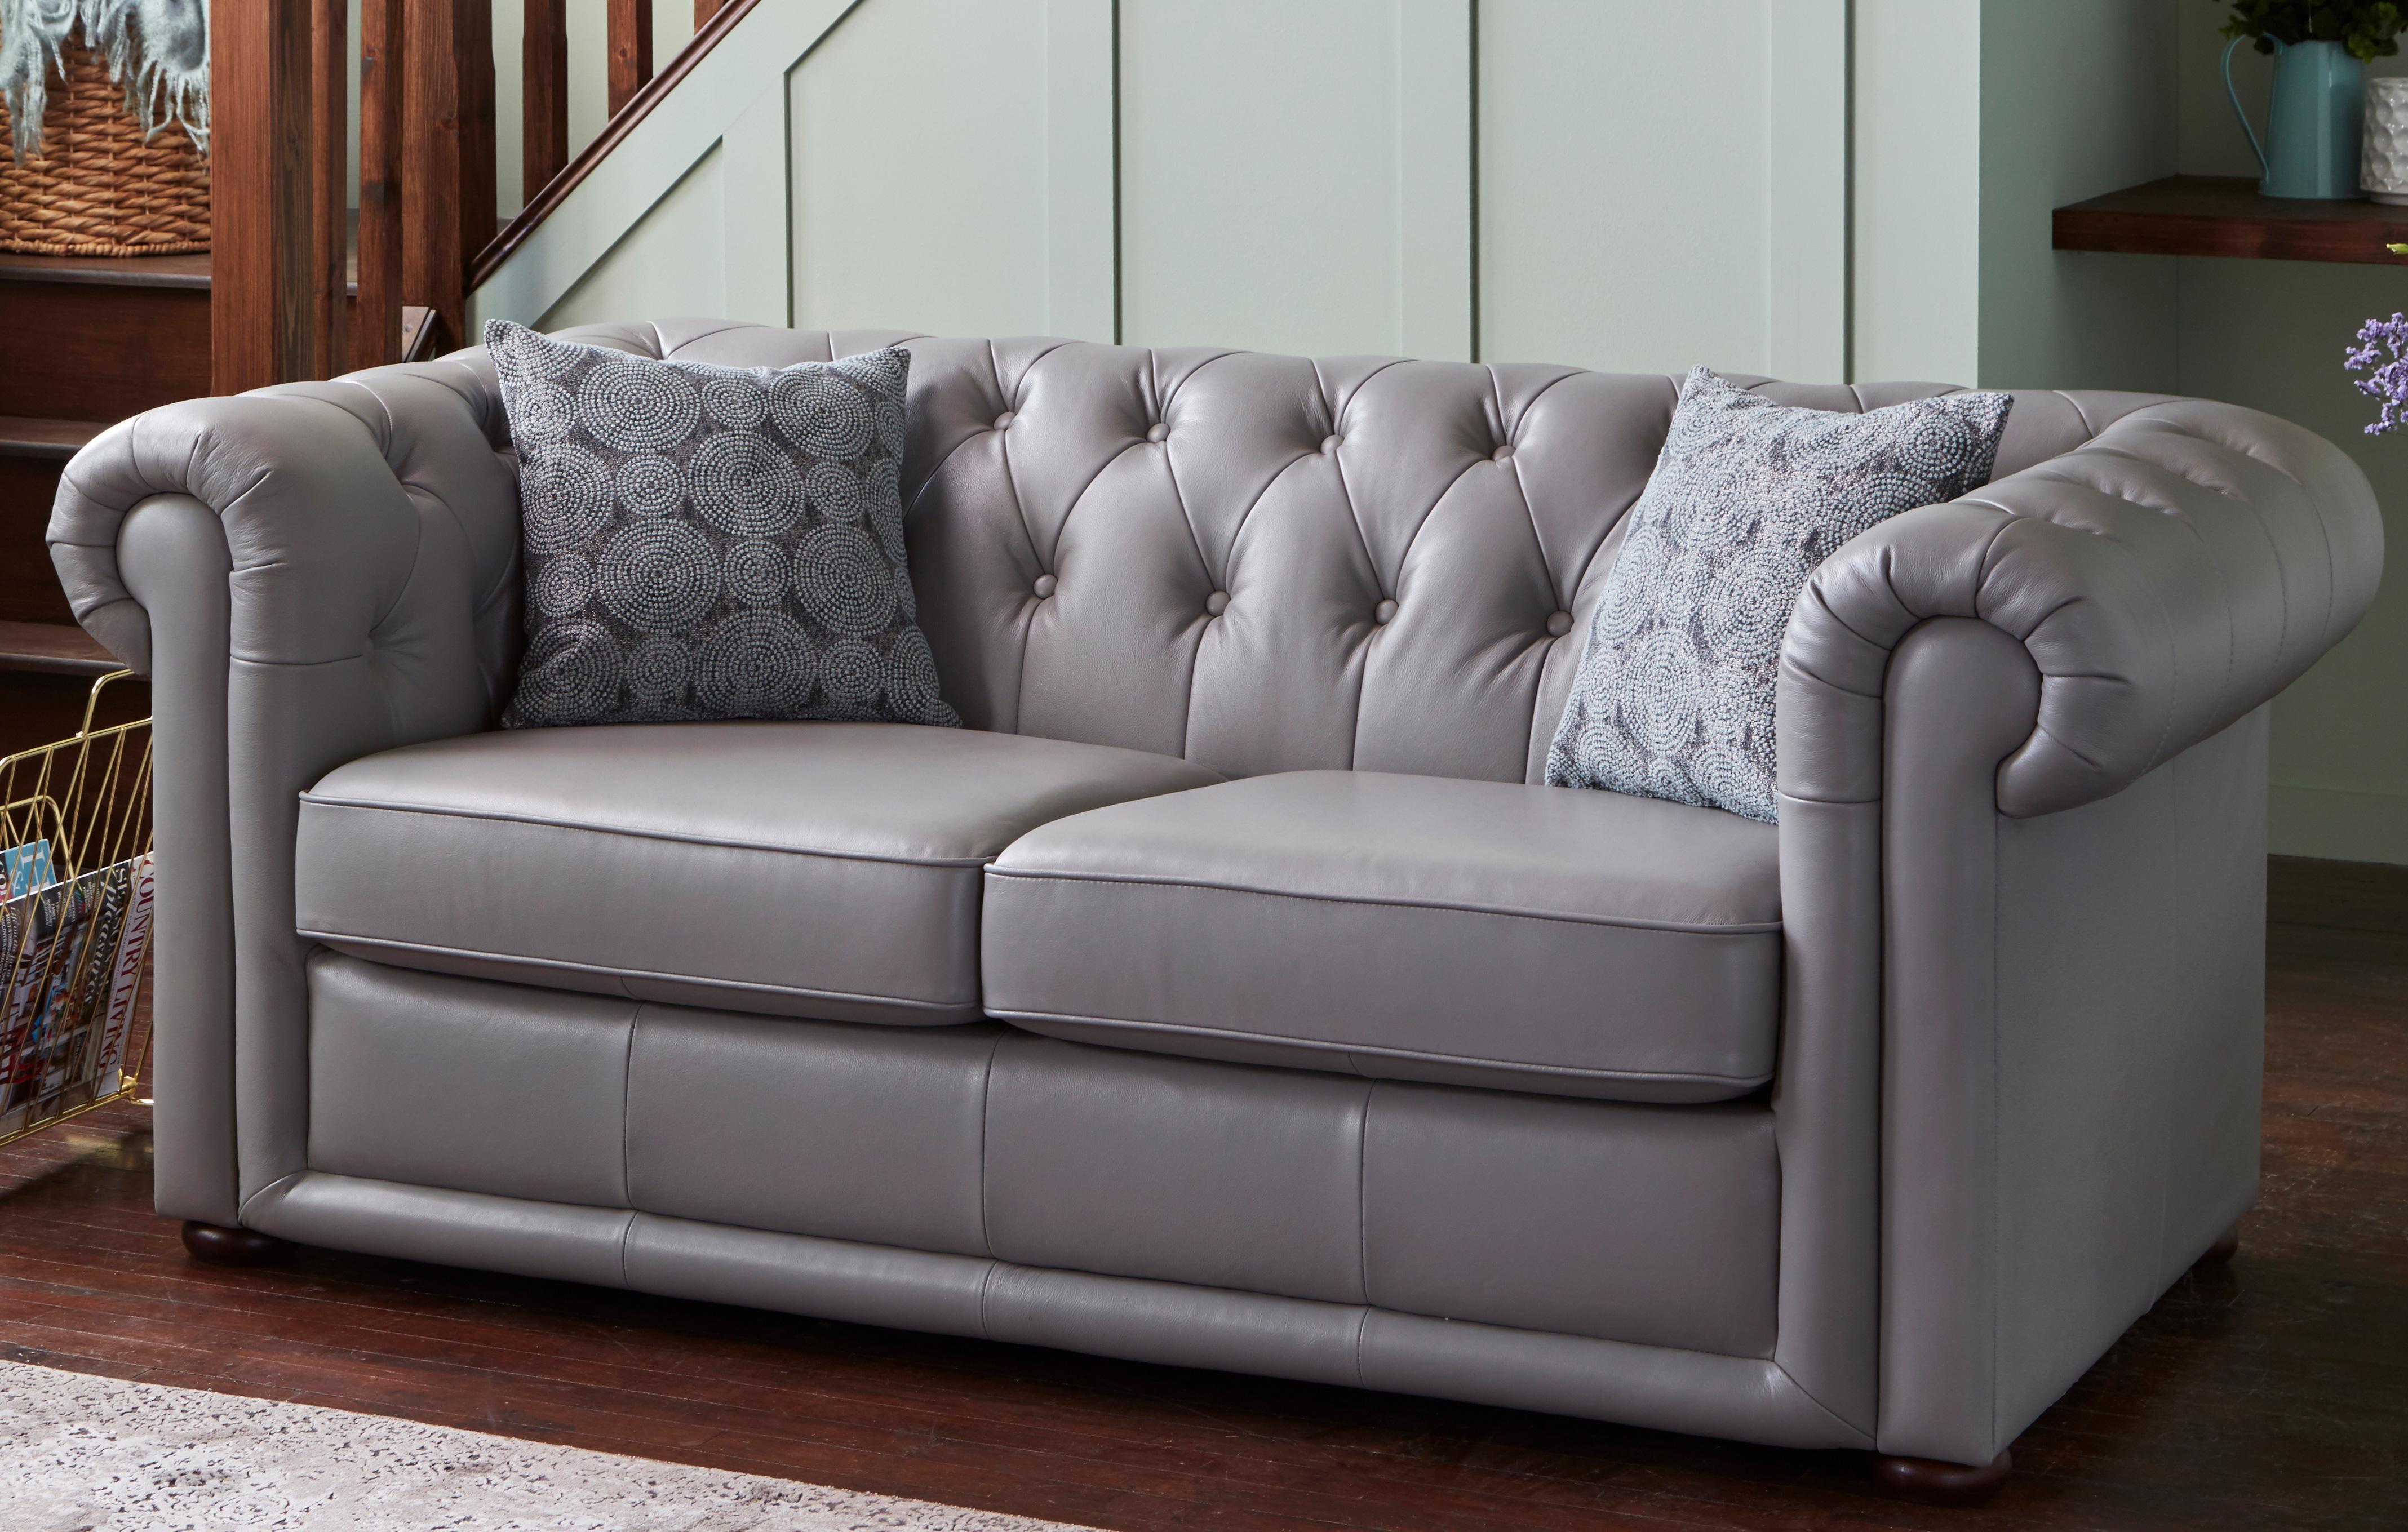 Chester Leather 2 Seater Sofa Bed Brooke